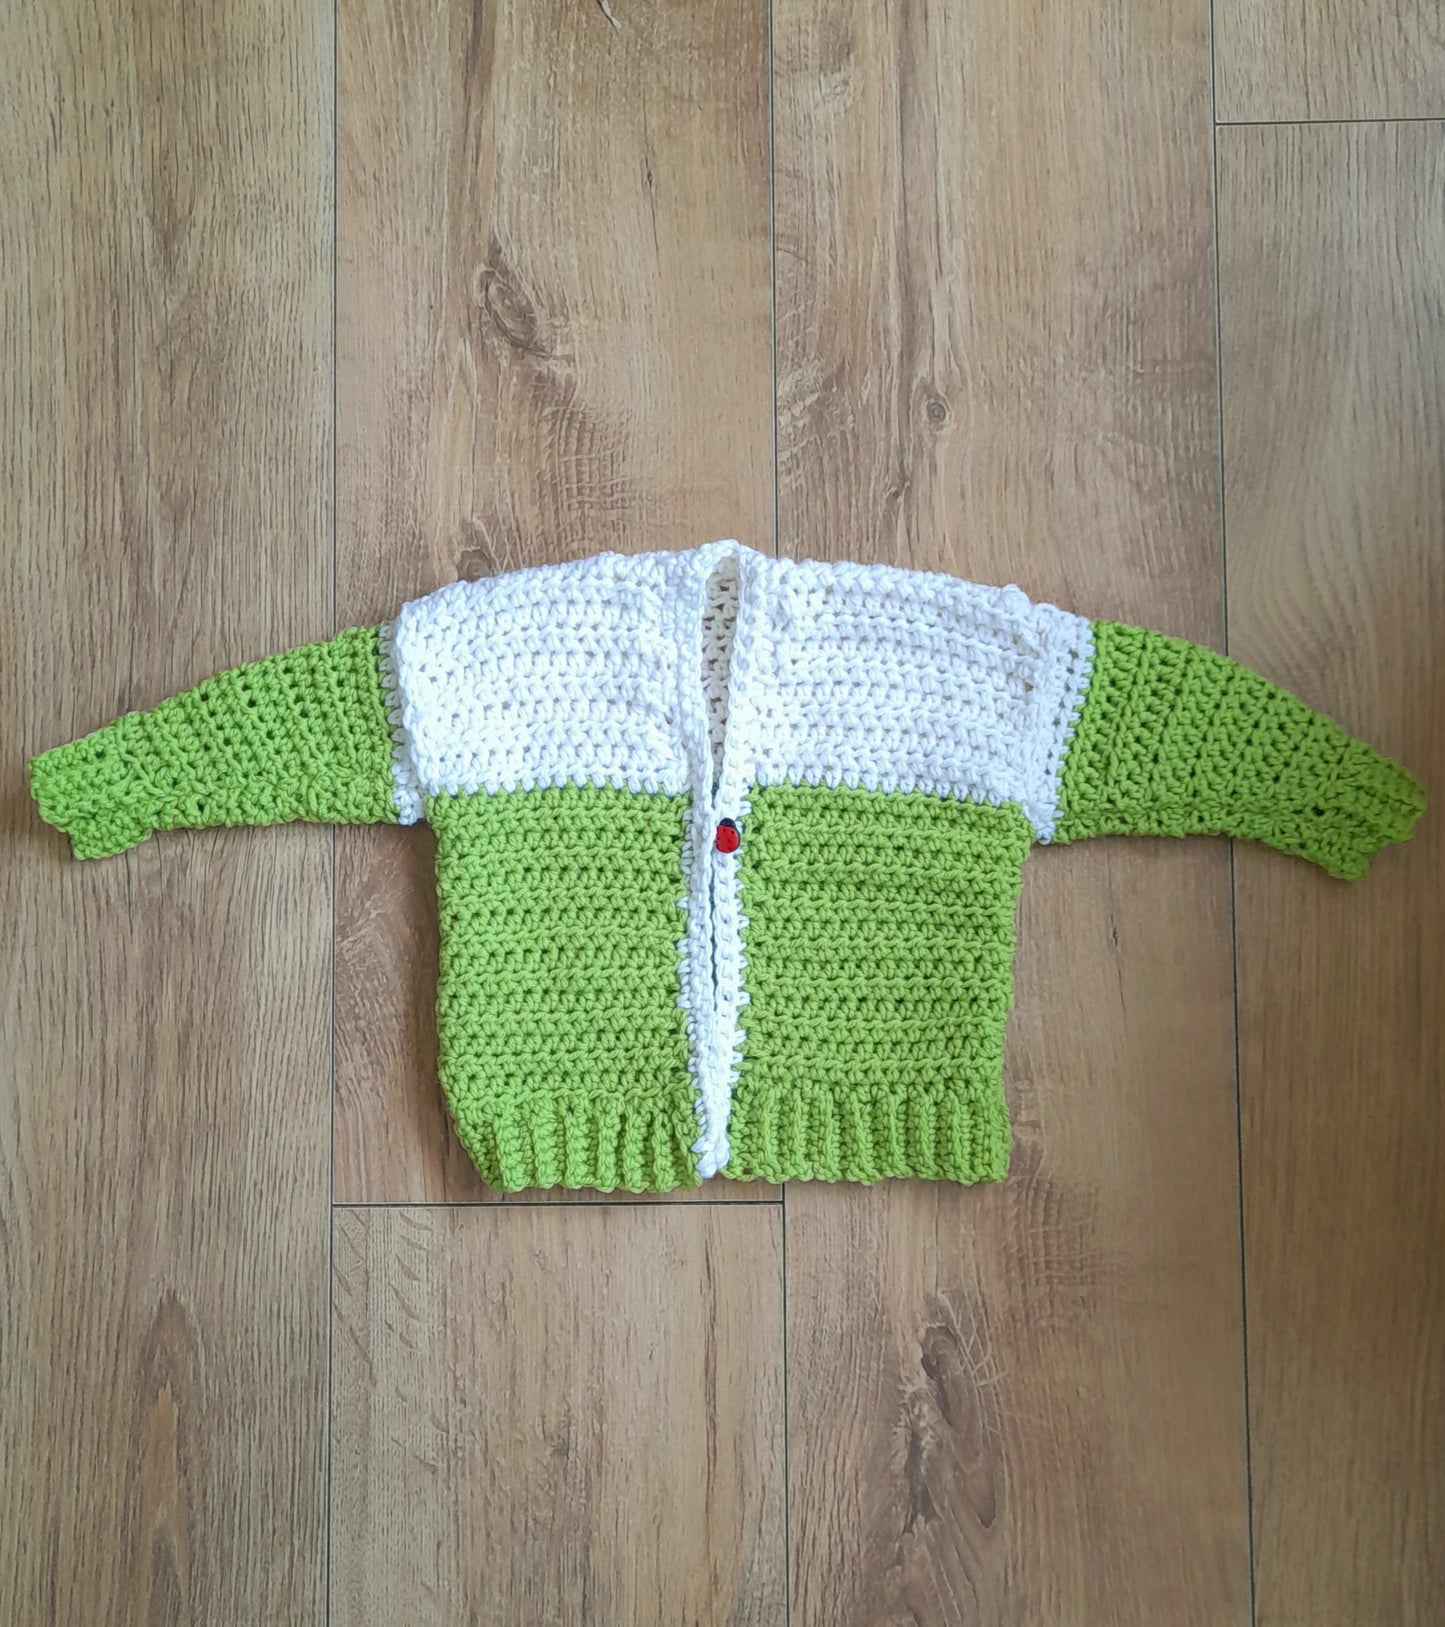 Lovechunk baby sweater. Simple baby and toddler crochet patterns. Beginner crochet cardigan for babies. 